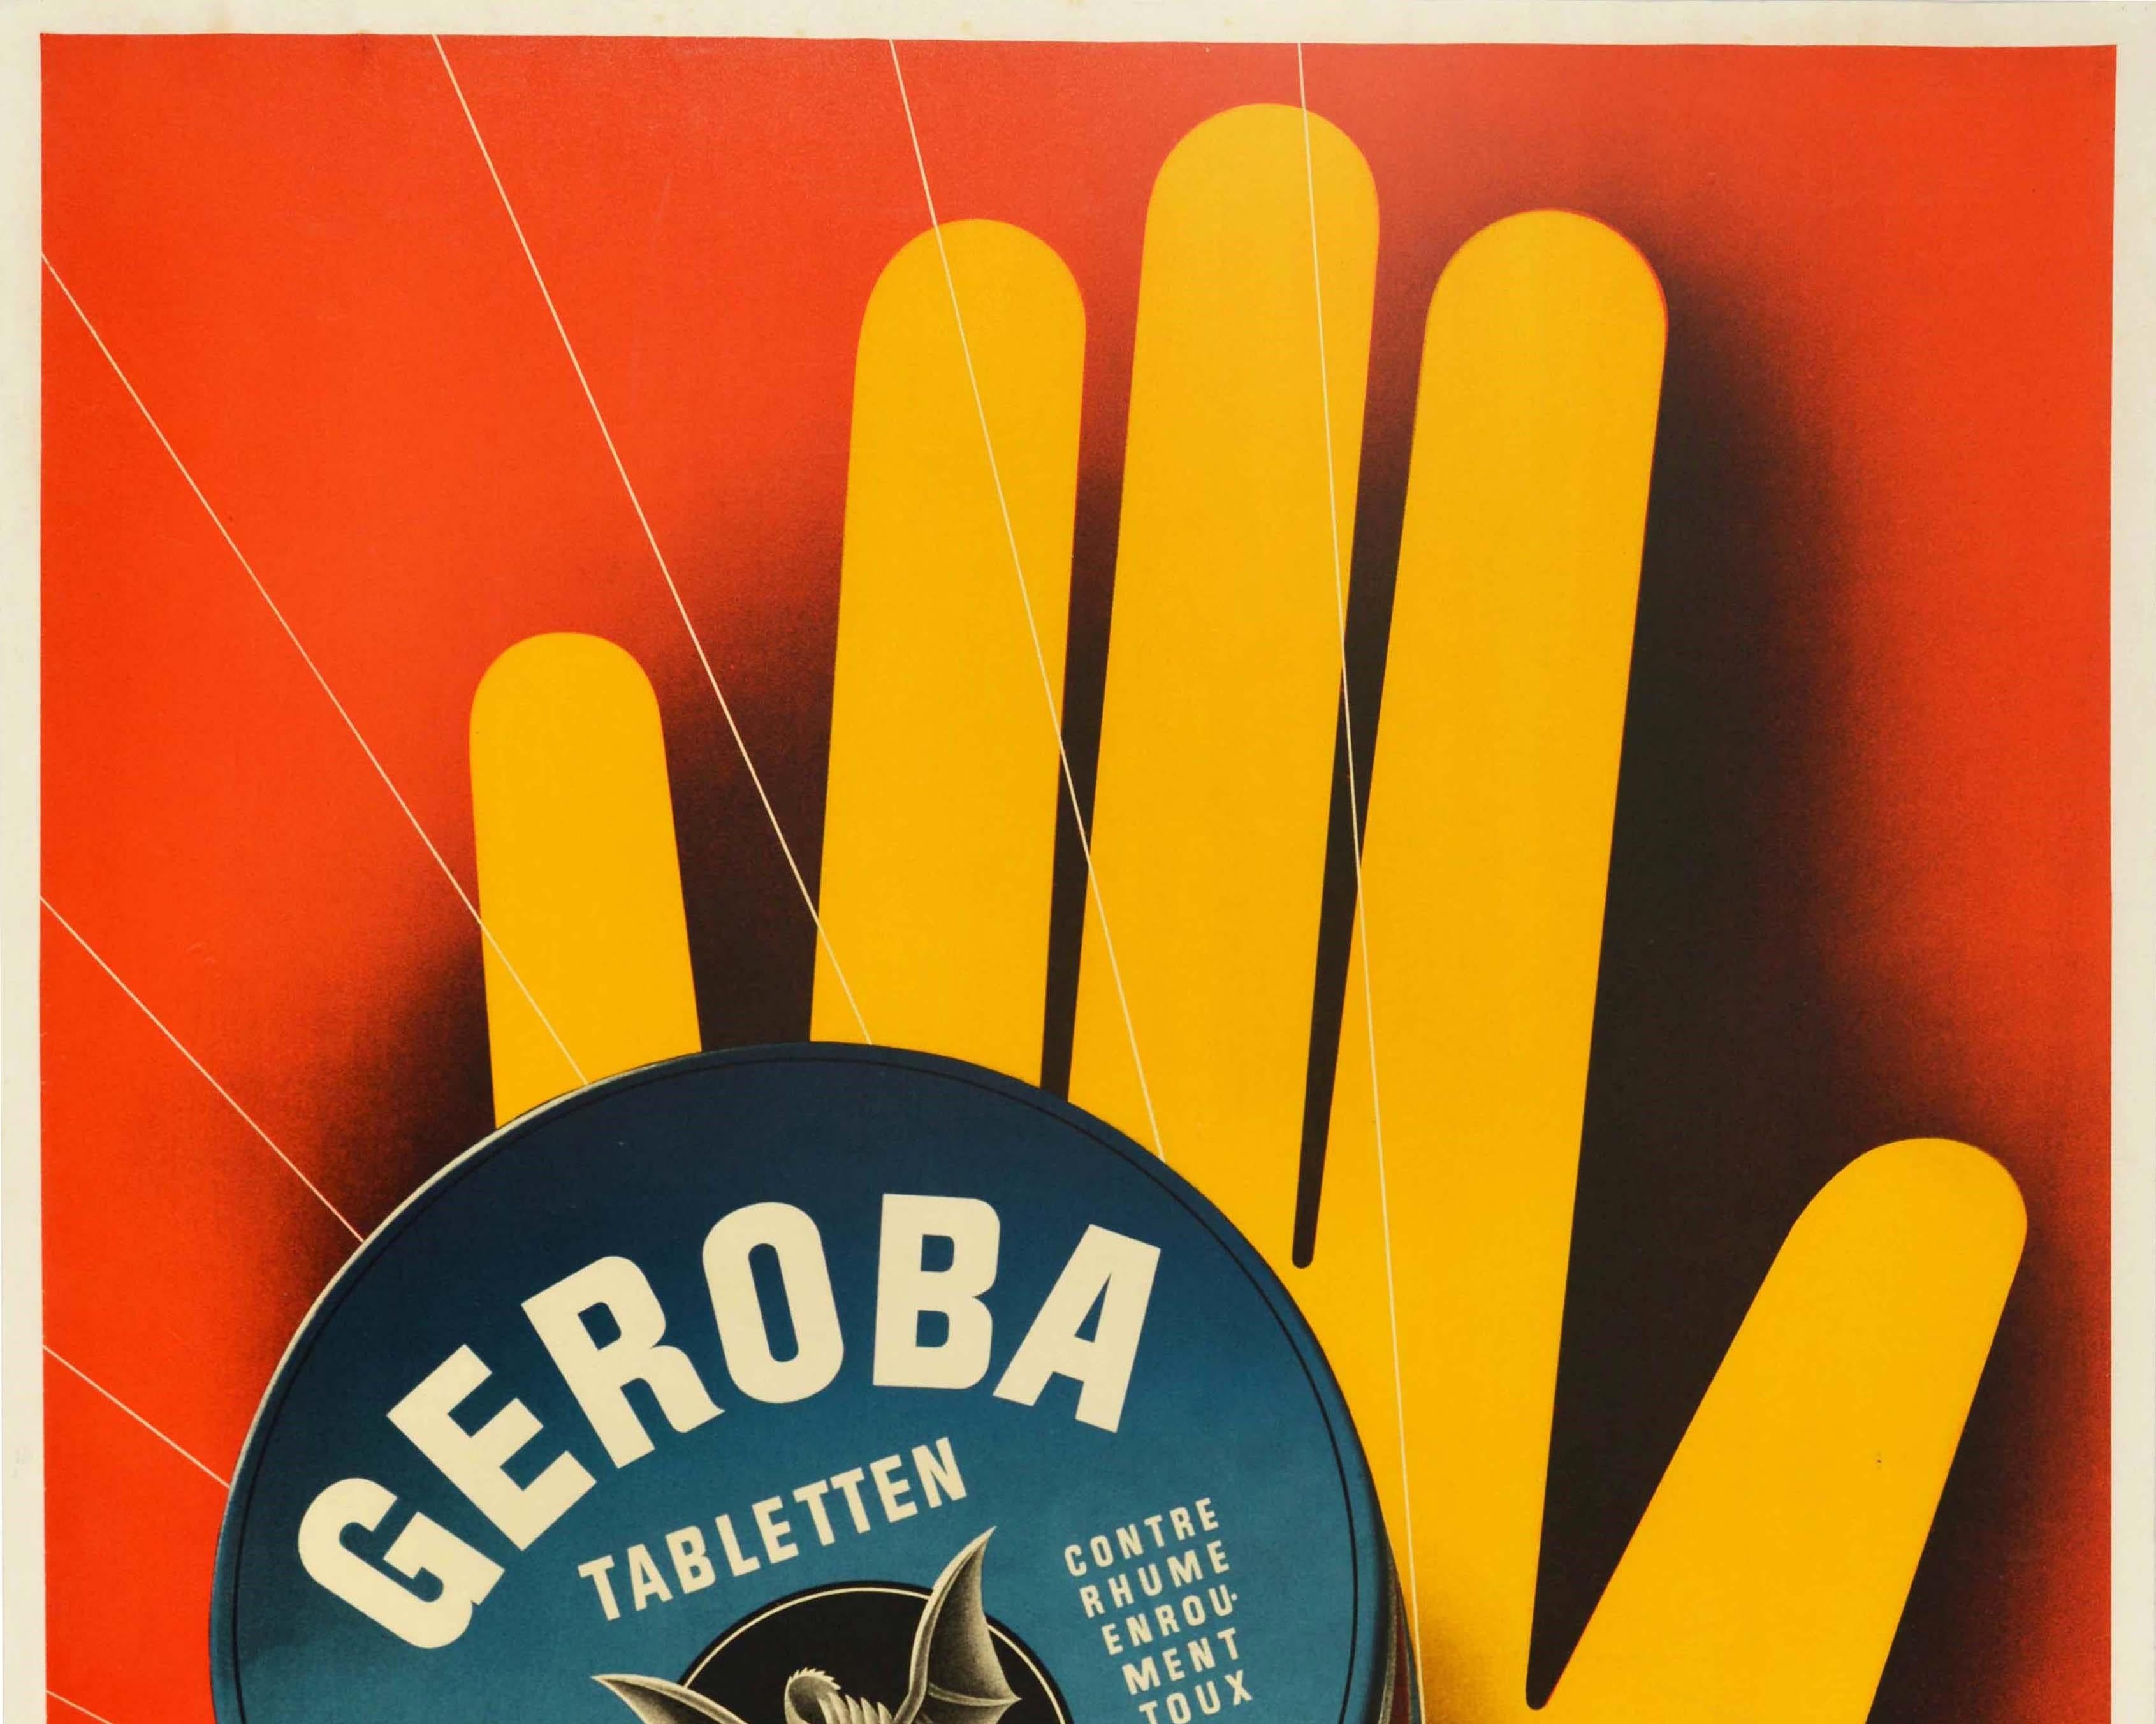 Original vintage poster advertising Geroba cough lozenges featuring a great graphic design illustration by Edi Hauri (1911-1988) depicting a yellow hand shape held up as a stop signal on a red background holding a Geroba Tabletten tin with the